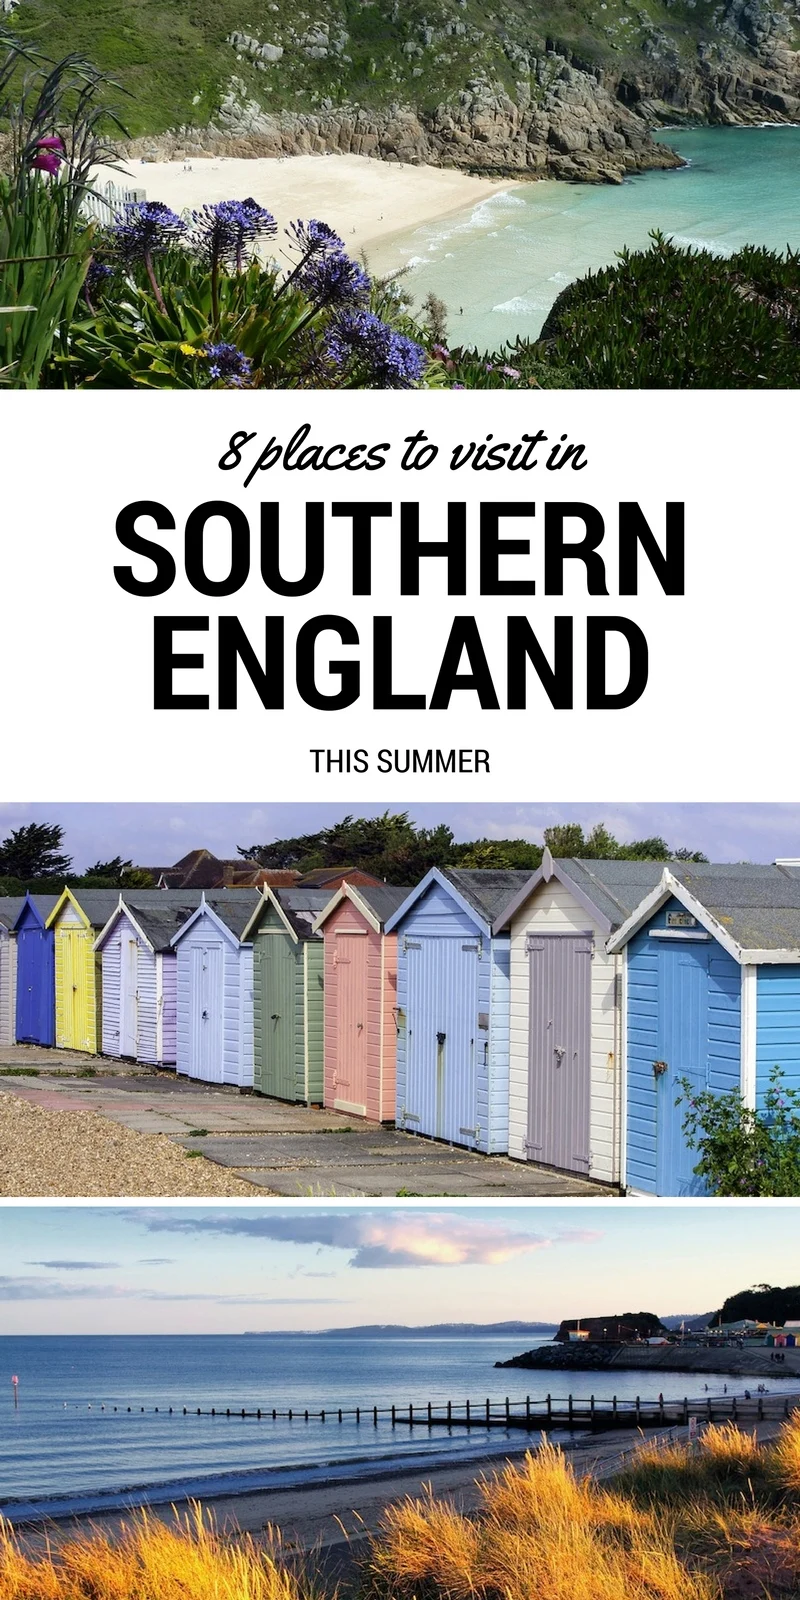 8 places to visit in Southern England